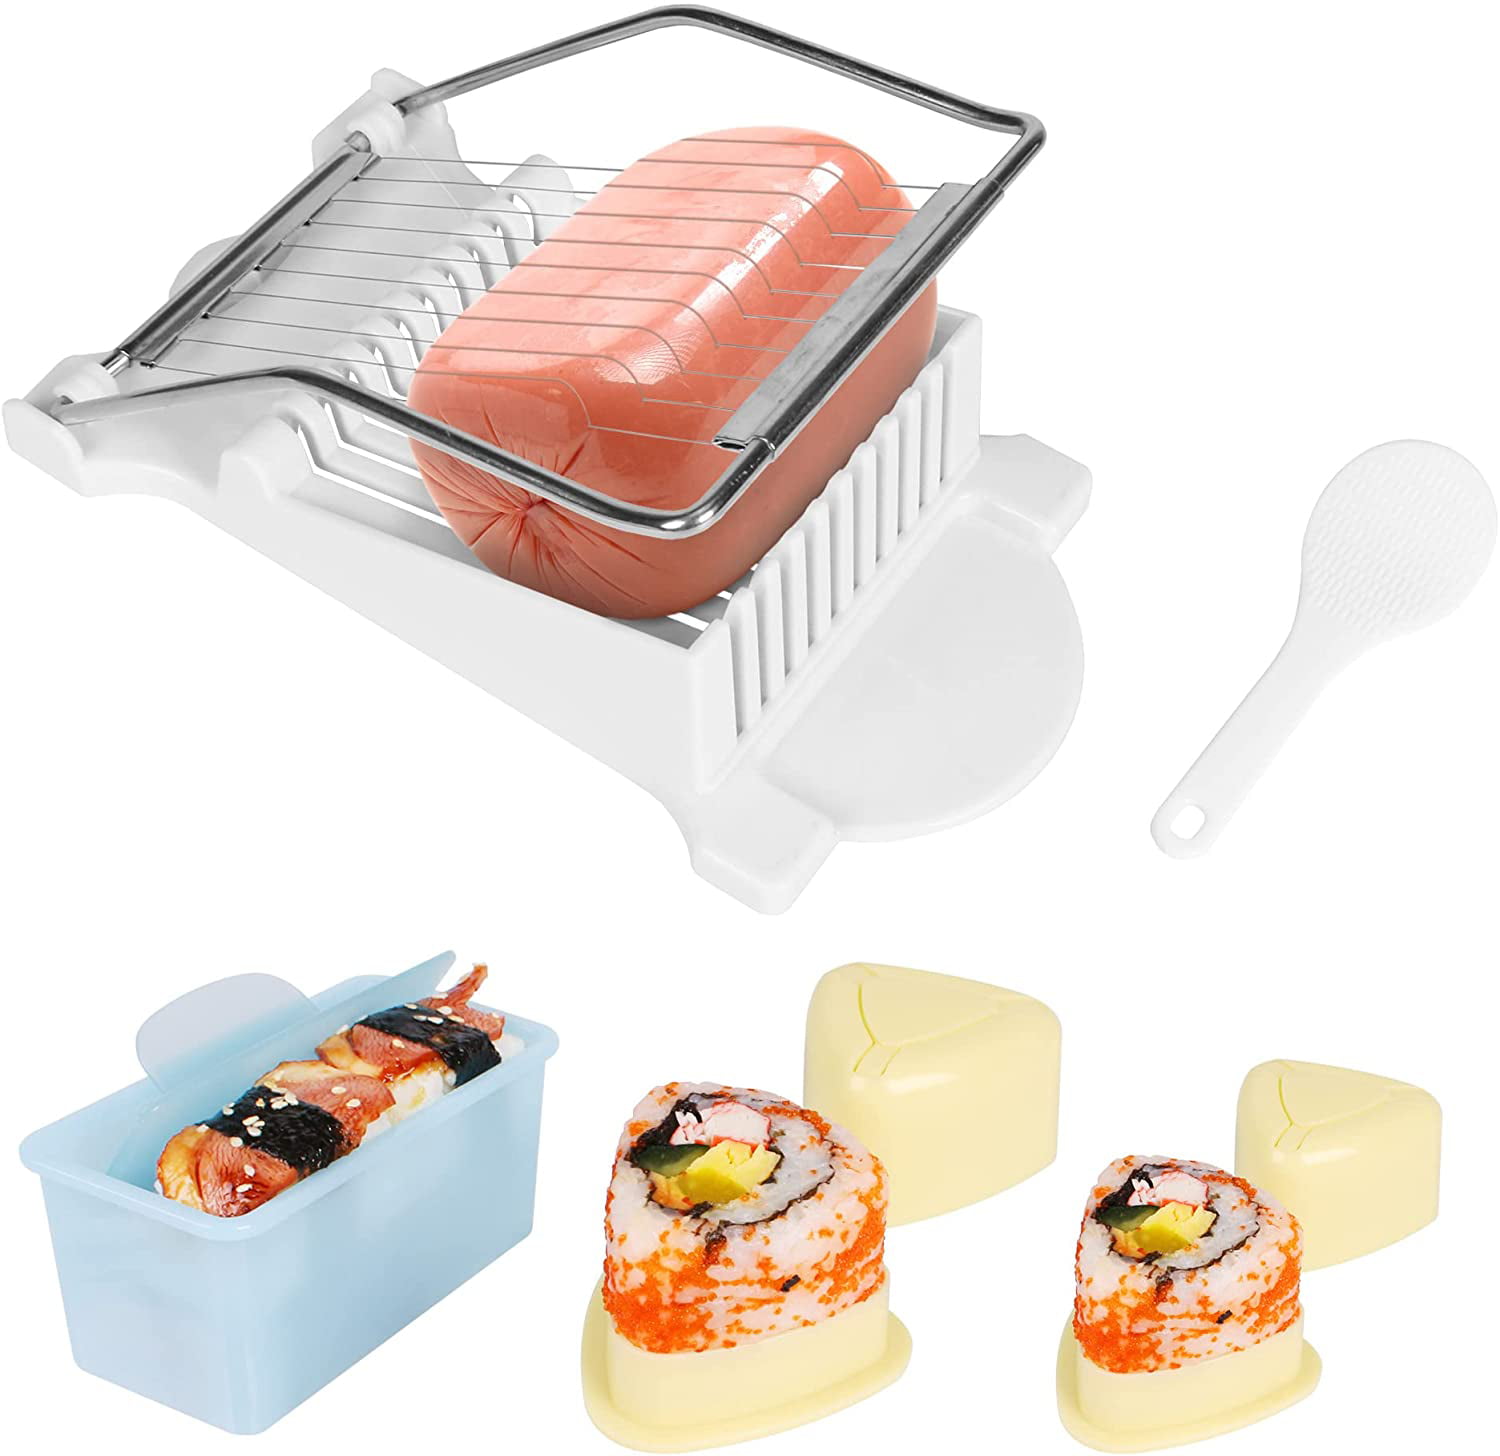  Luncheon Meat Musubi Maker Kit, 2 Pcs Non-Stick Musubi Mold and  Luncheon Meat Slicer, Egg Lunch Meat Slicer Cutter and Musubi Press with  Rice Paddles, Rice Mold Onigiri Sushi Making Kit 